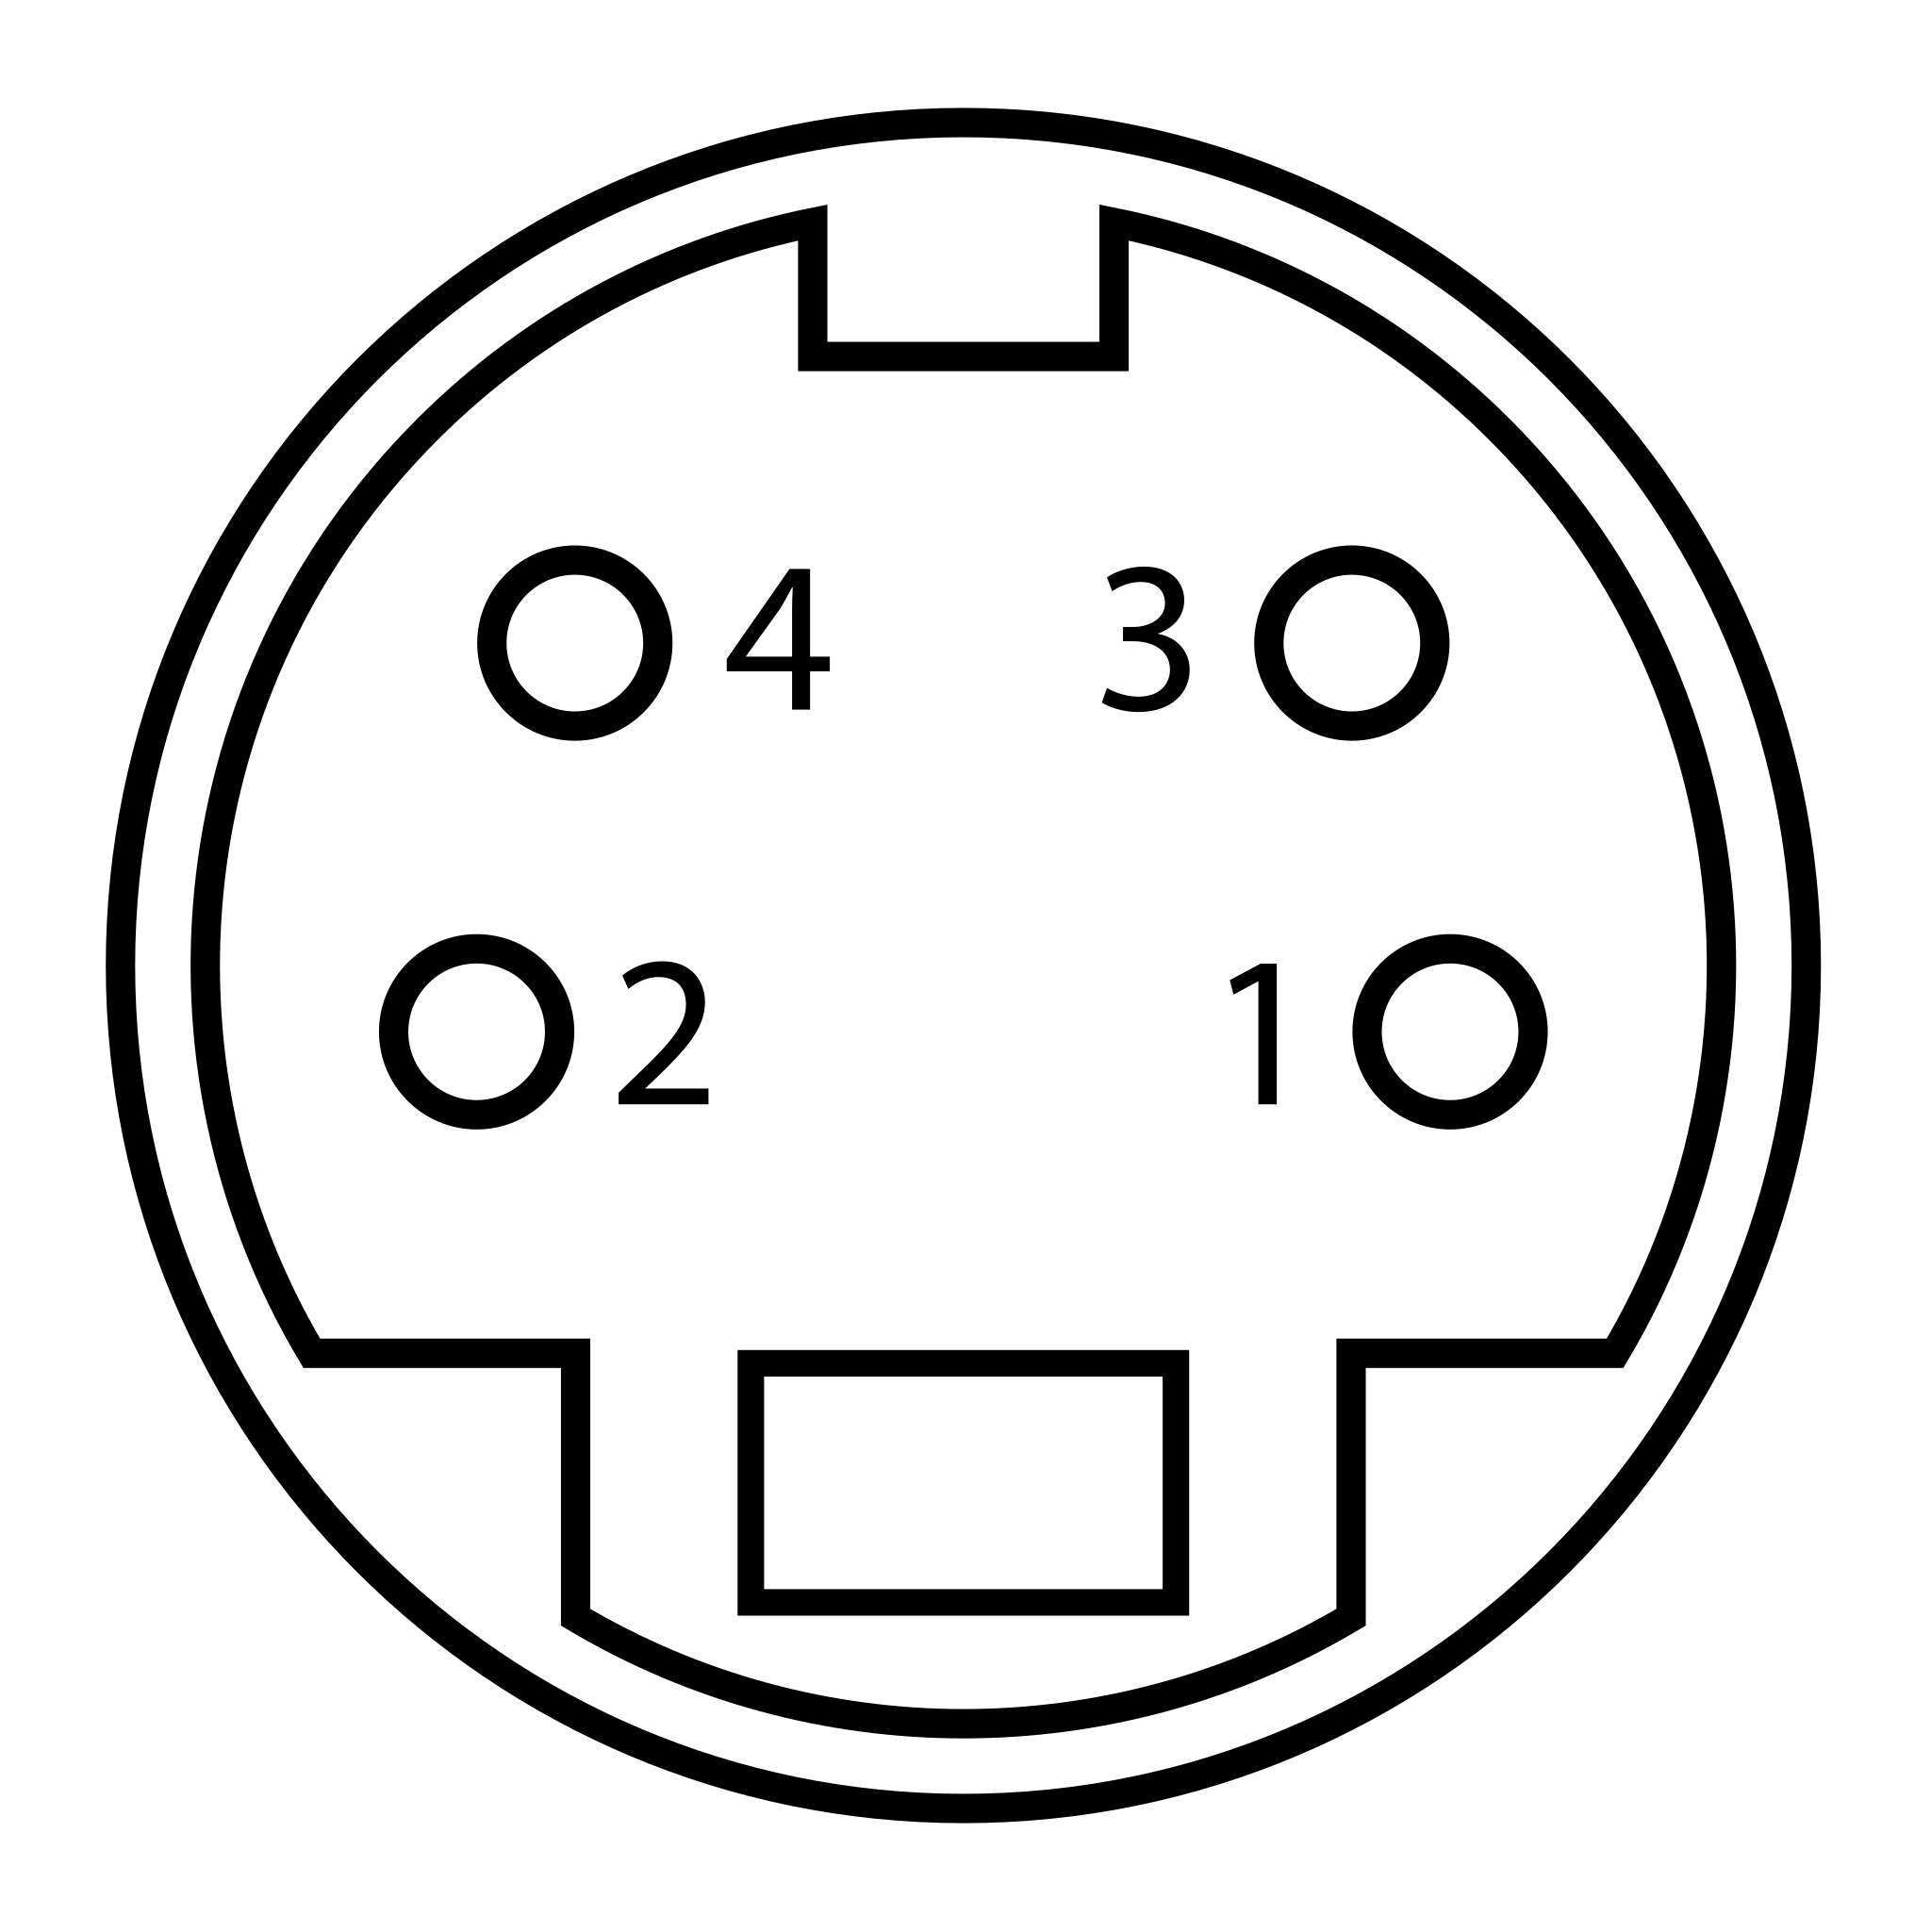 File:MiniDIN-4 Connector Pinout.svg - Wikimedia Commons